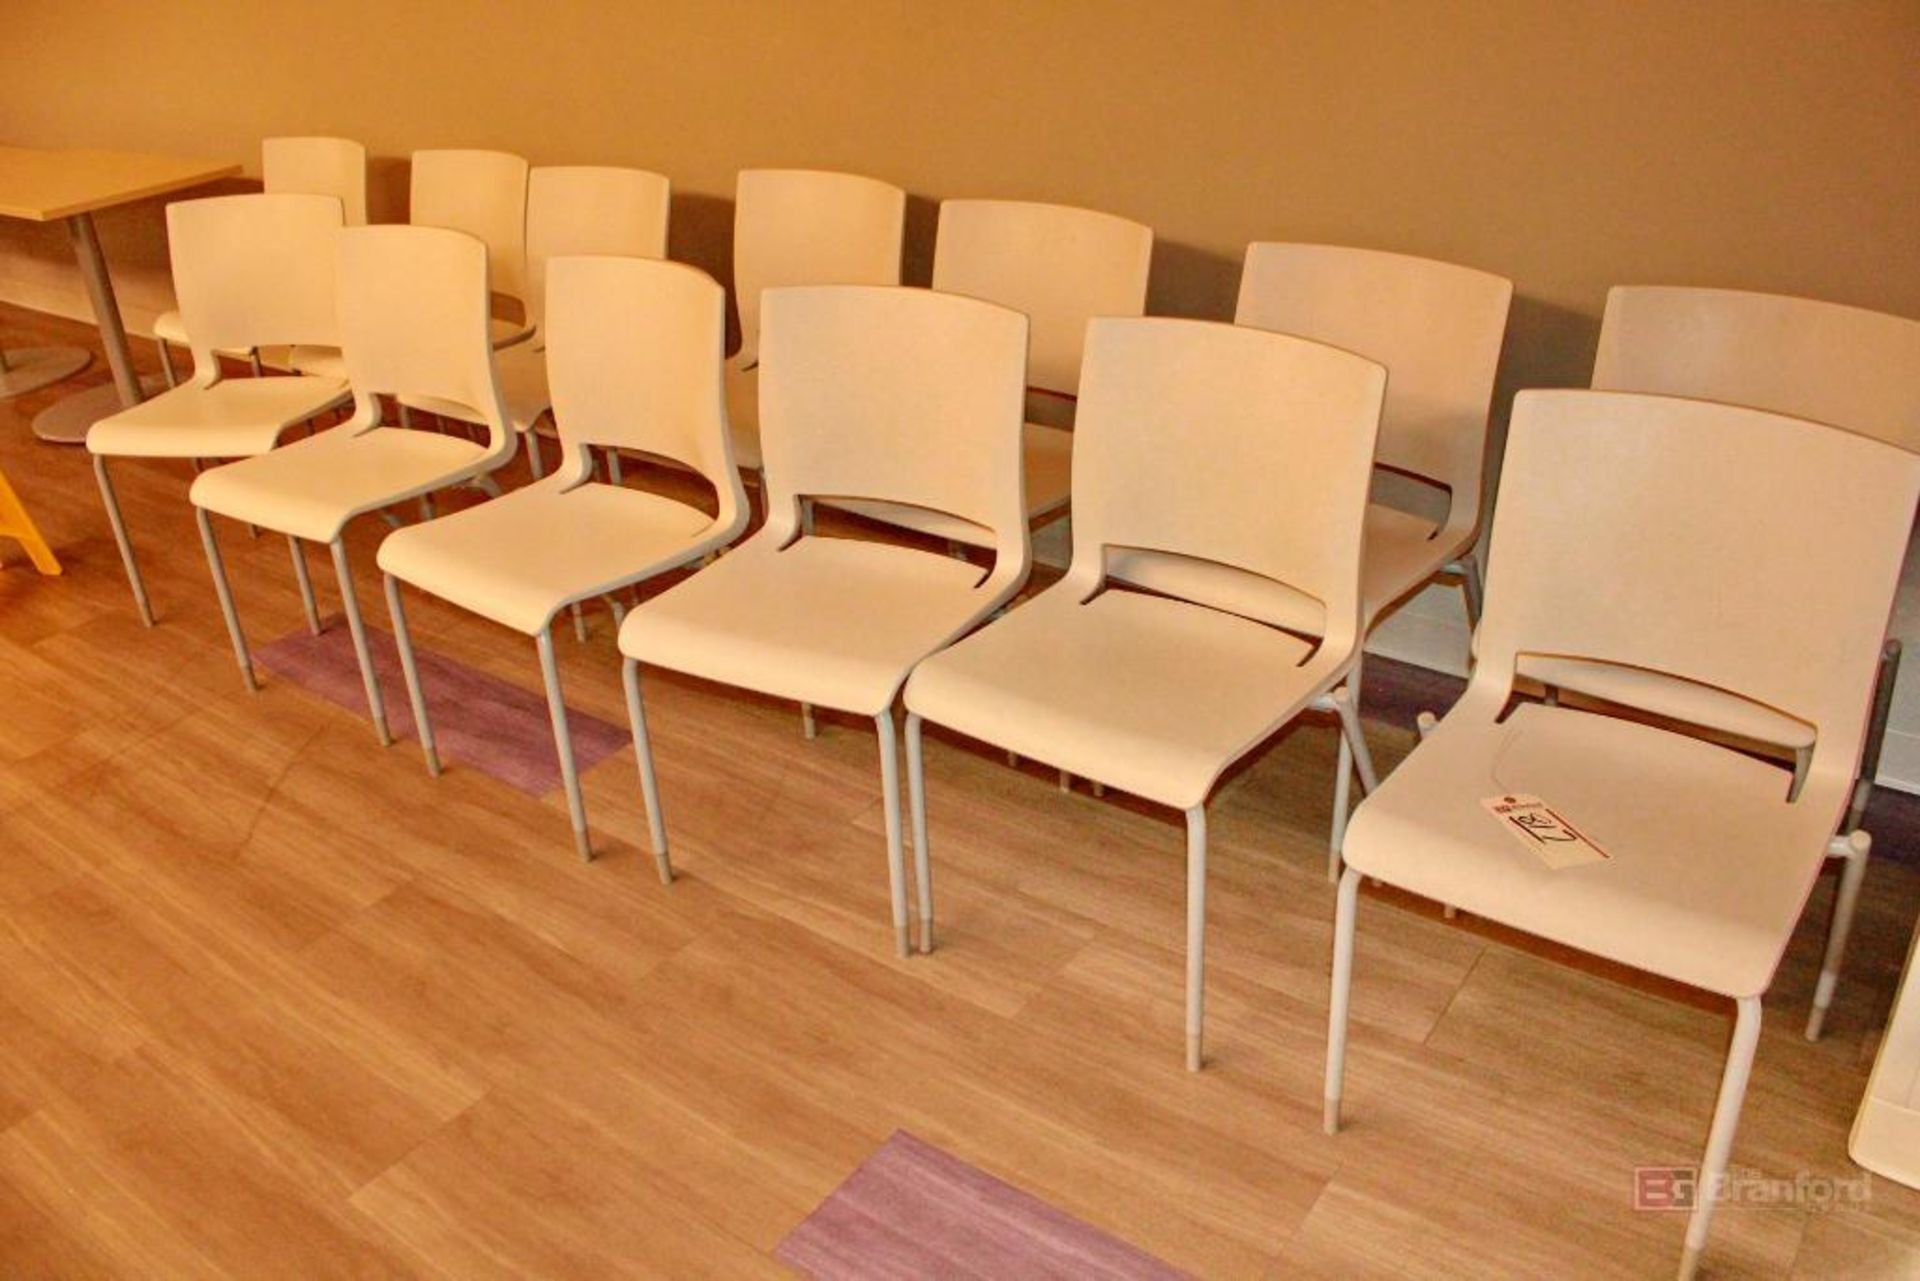 (14) Rectangle Tables & (28) Chairs, Table Size, 2ft x 3ft - Image 2 of 3